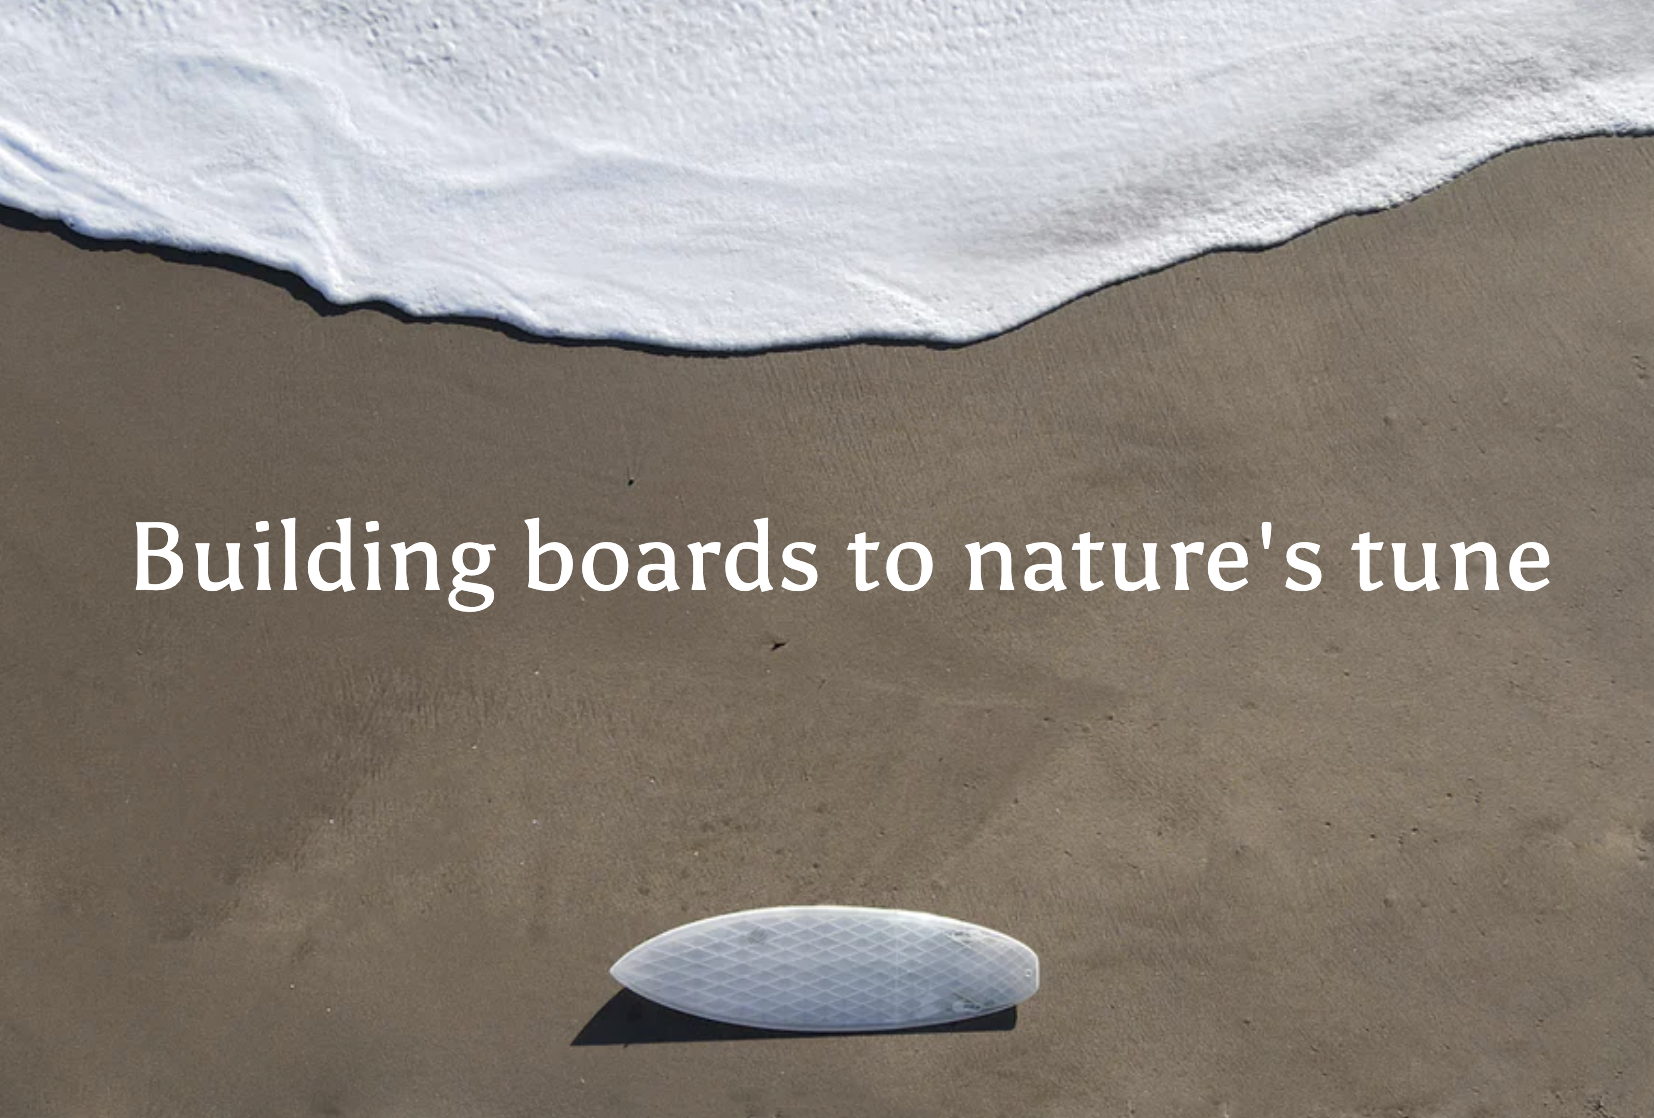 Building boards to nature's tune. White sea foam on the coast above the text. Below the text is a swellcycle surfboard laying on the sand on it's side.